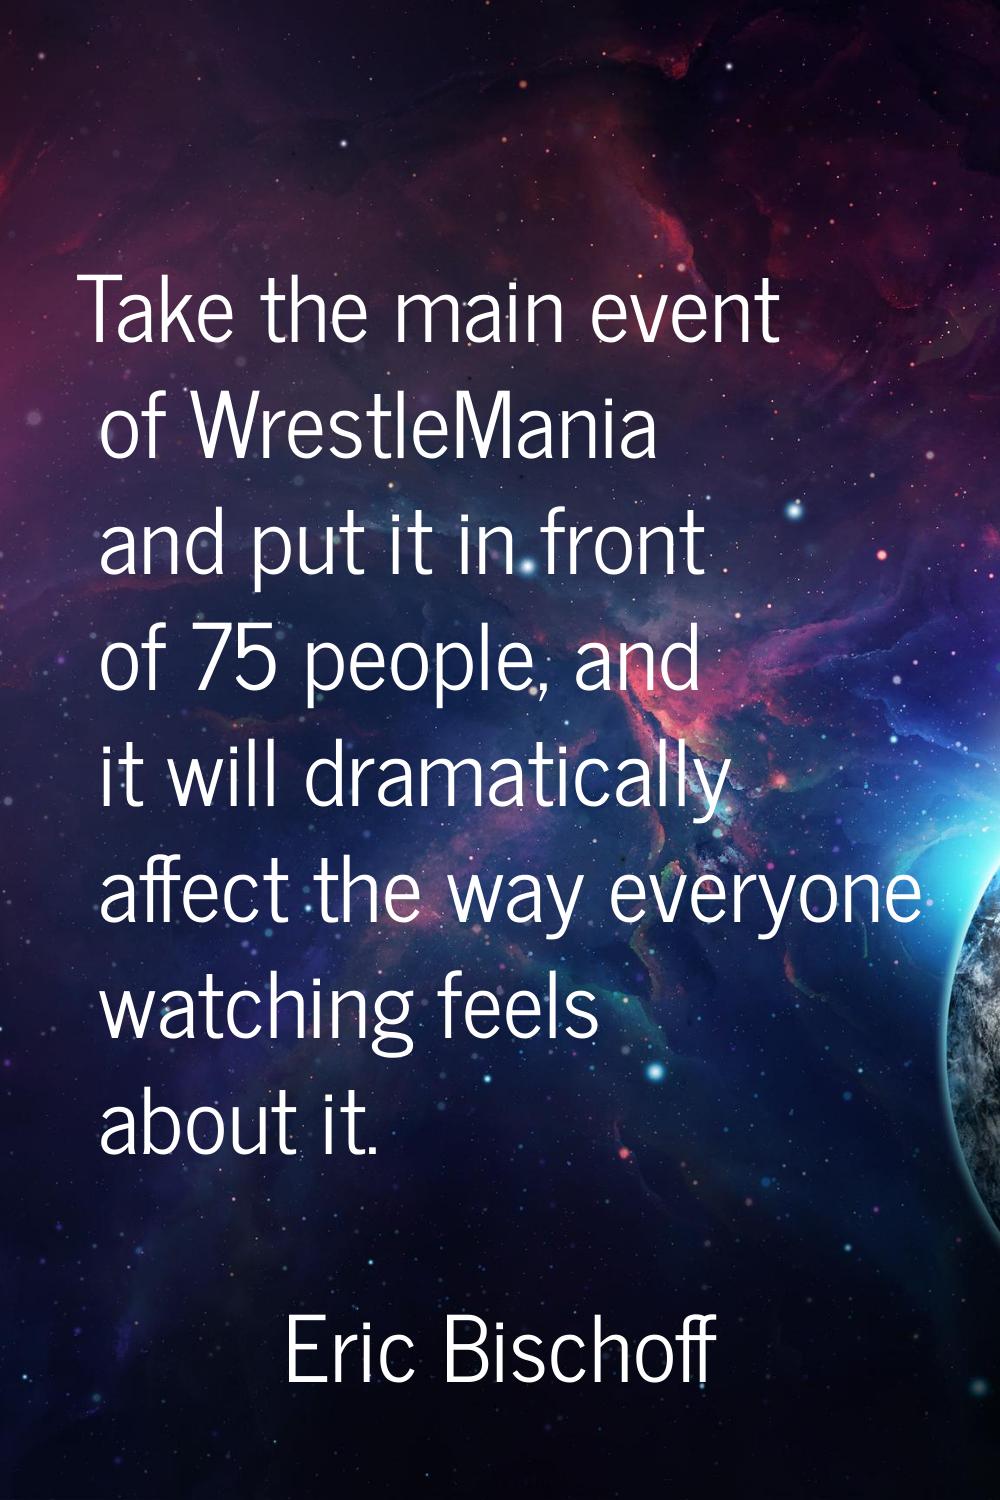 Take the main event of WrestleMania and put it in front of 75 people, and it will dramatically affe